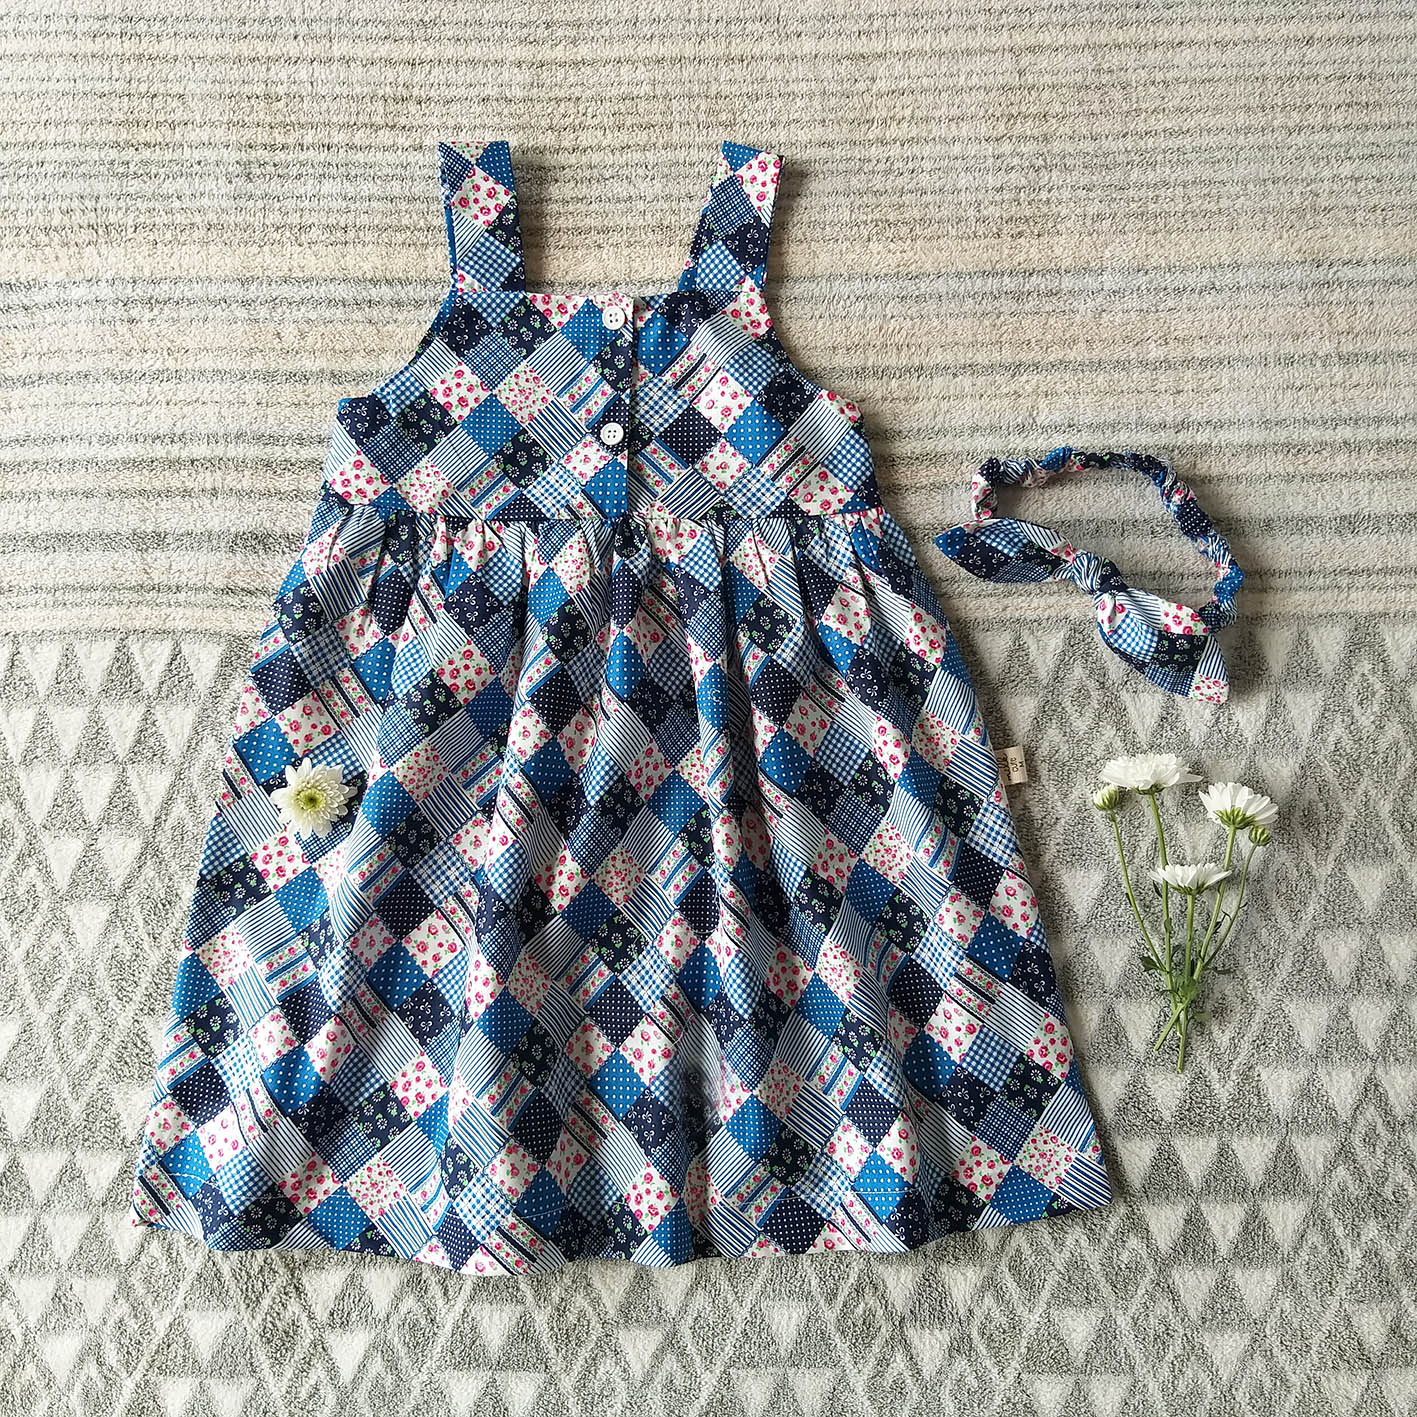 BUTTONS BACK TO FRONT PATCHWORK BLUE DRESS 100% PRINTED COTTON*HEADBAND NOT INCLUDED